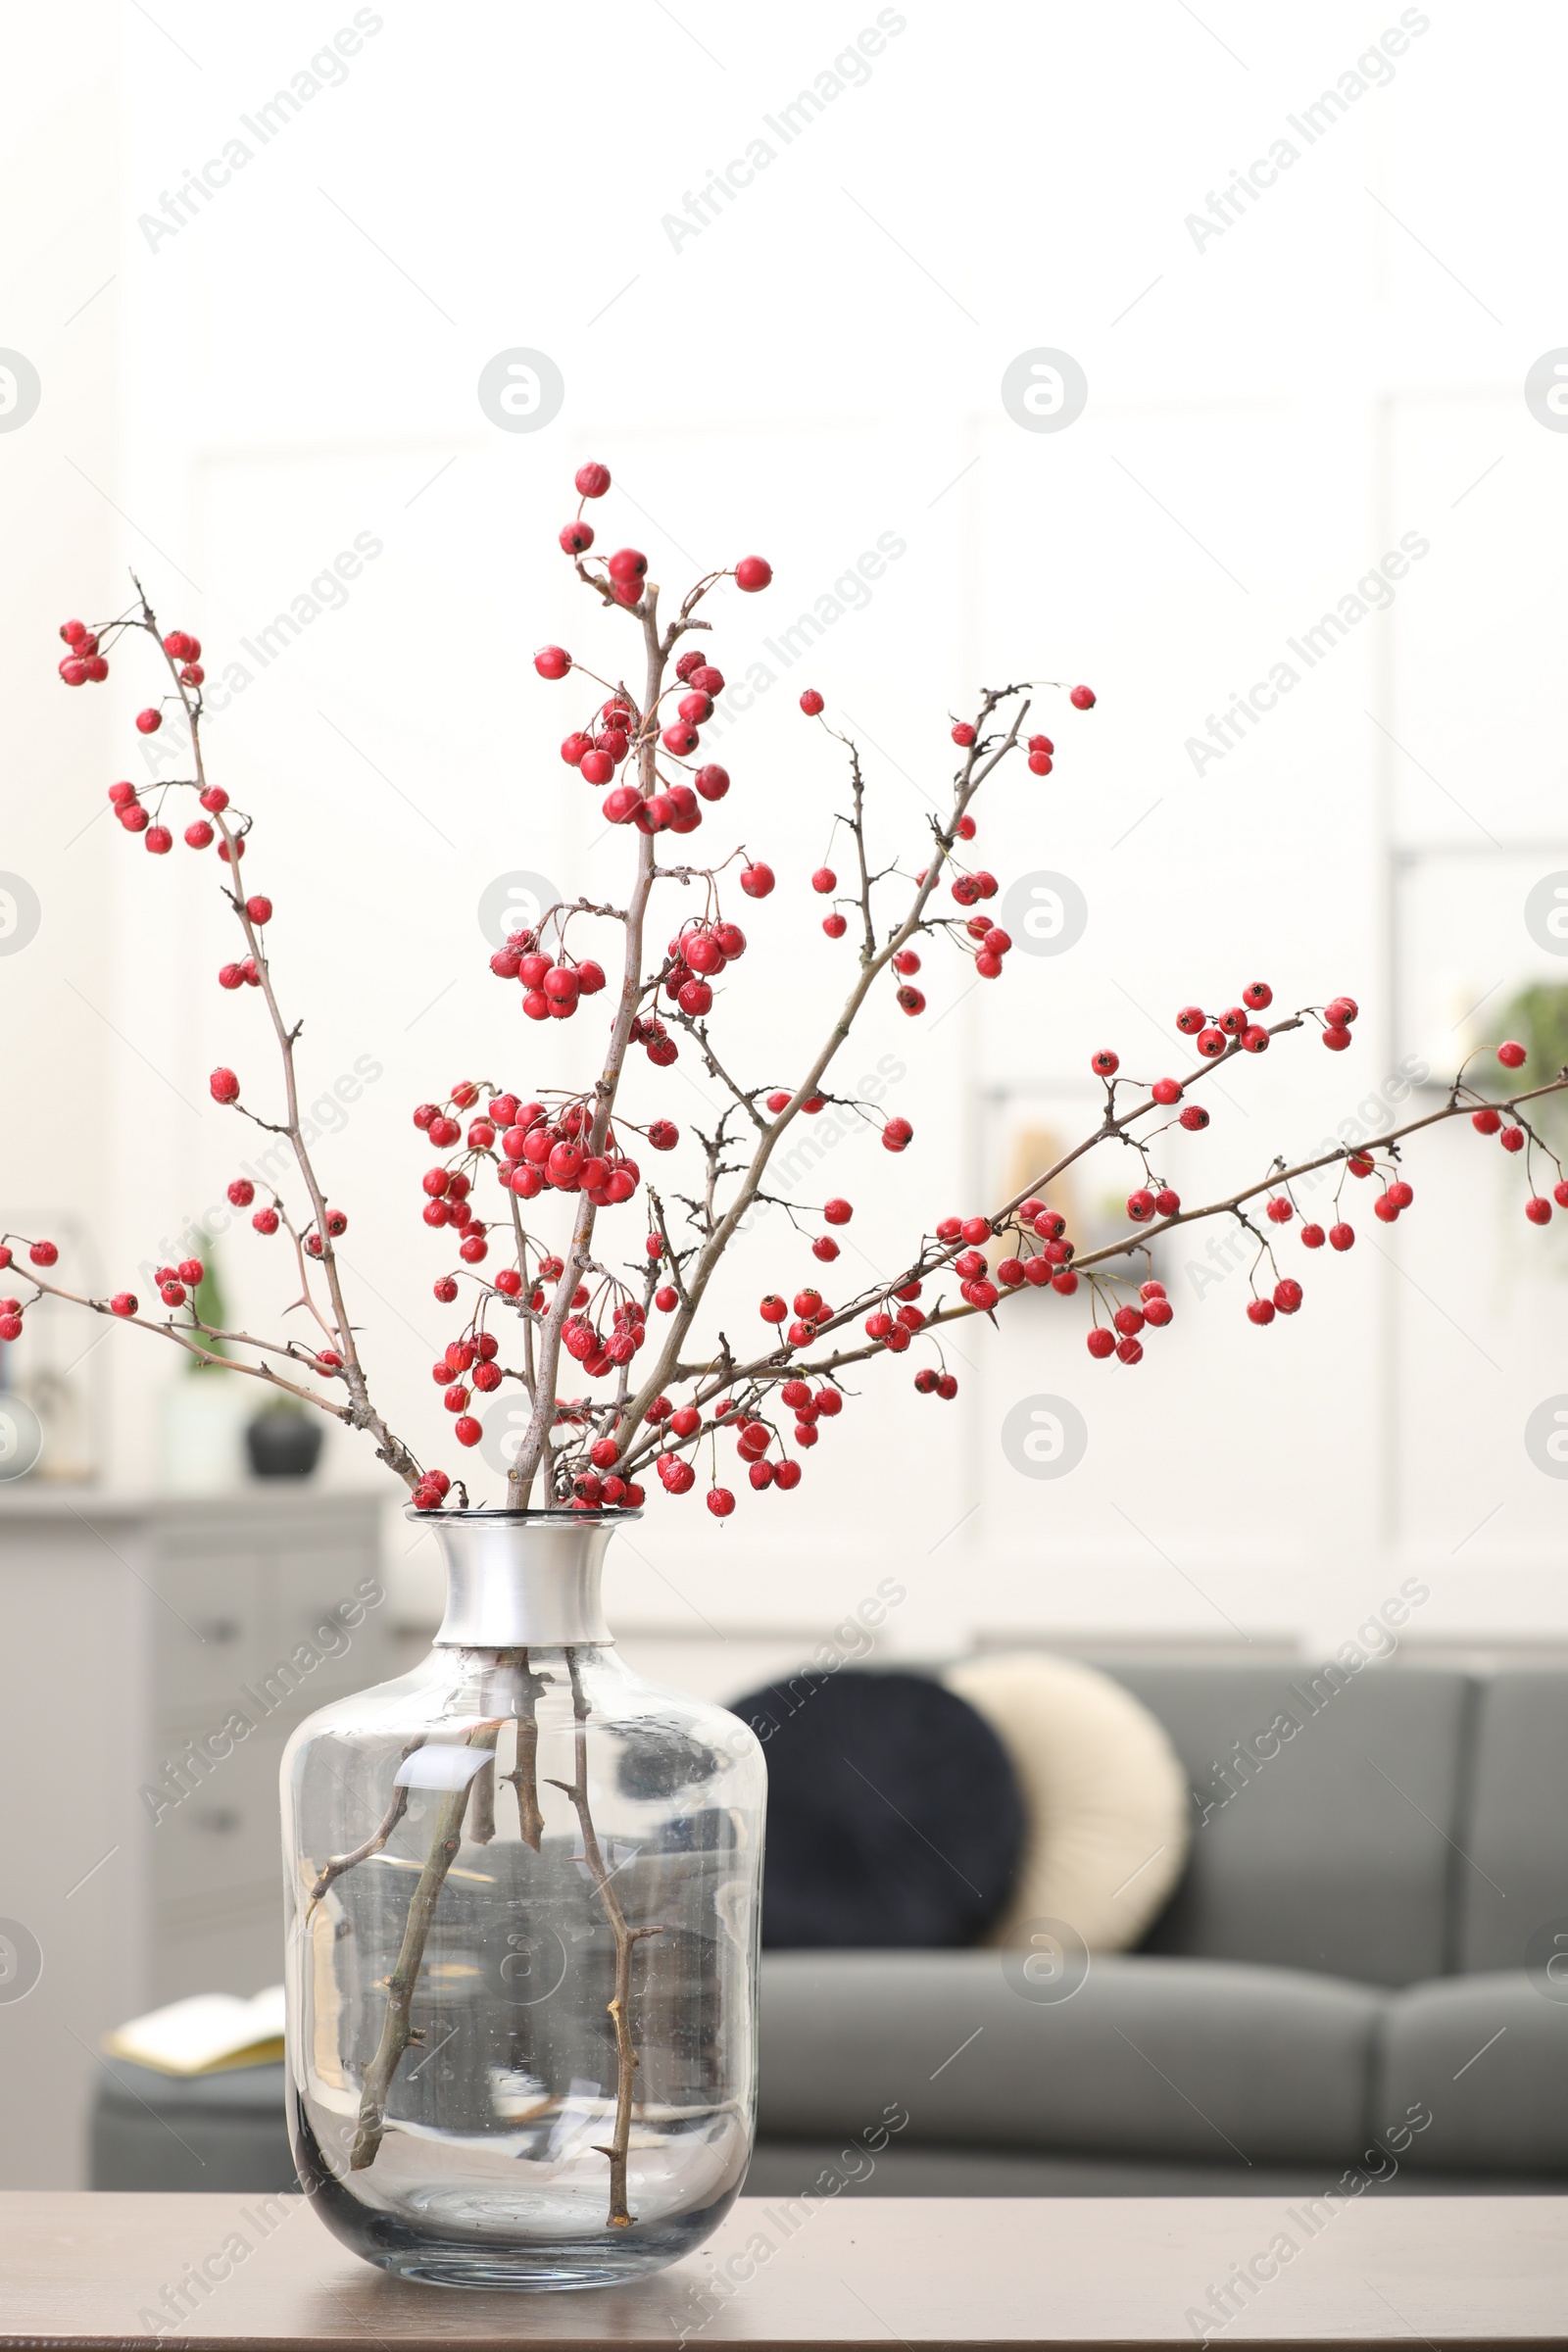 Photo of Hawthorn branches with red berries on table in living room